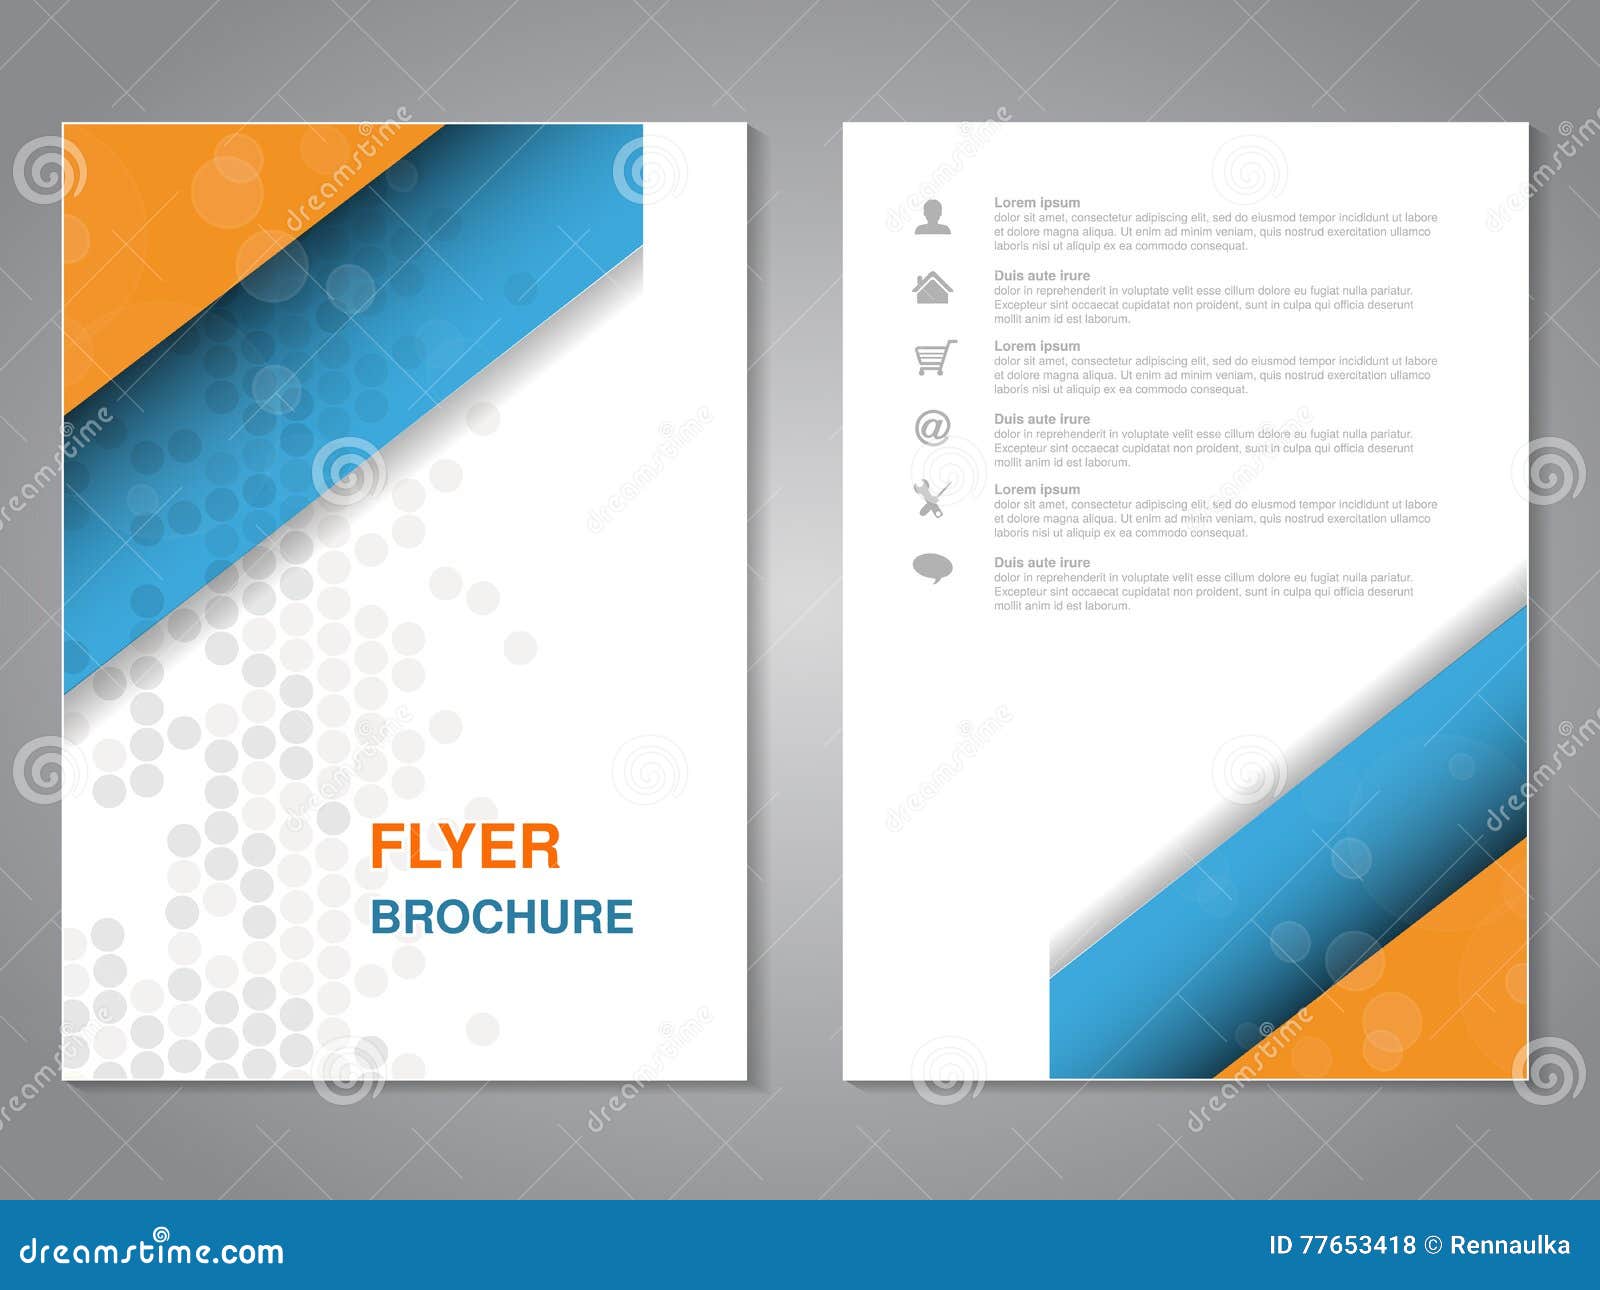 modern brochure, abstract flyer with simple dotted . layout template. aspect ratio for a4 size. poster of blue, orange, grey